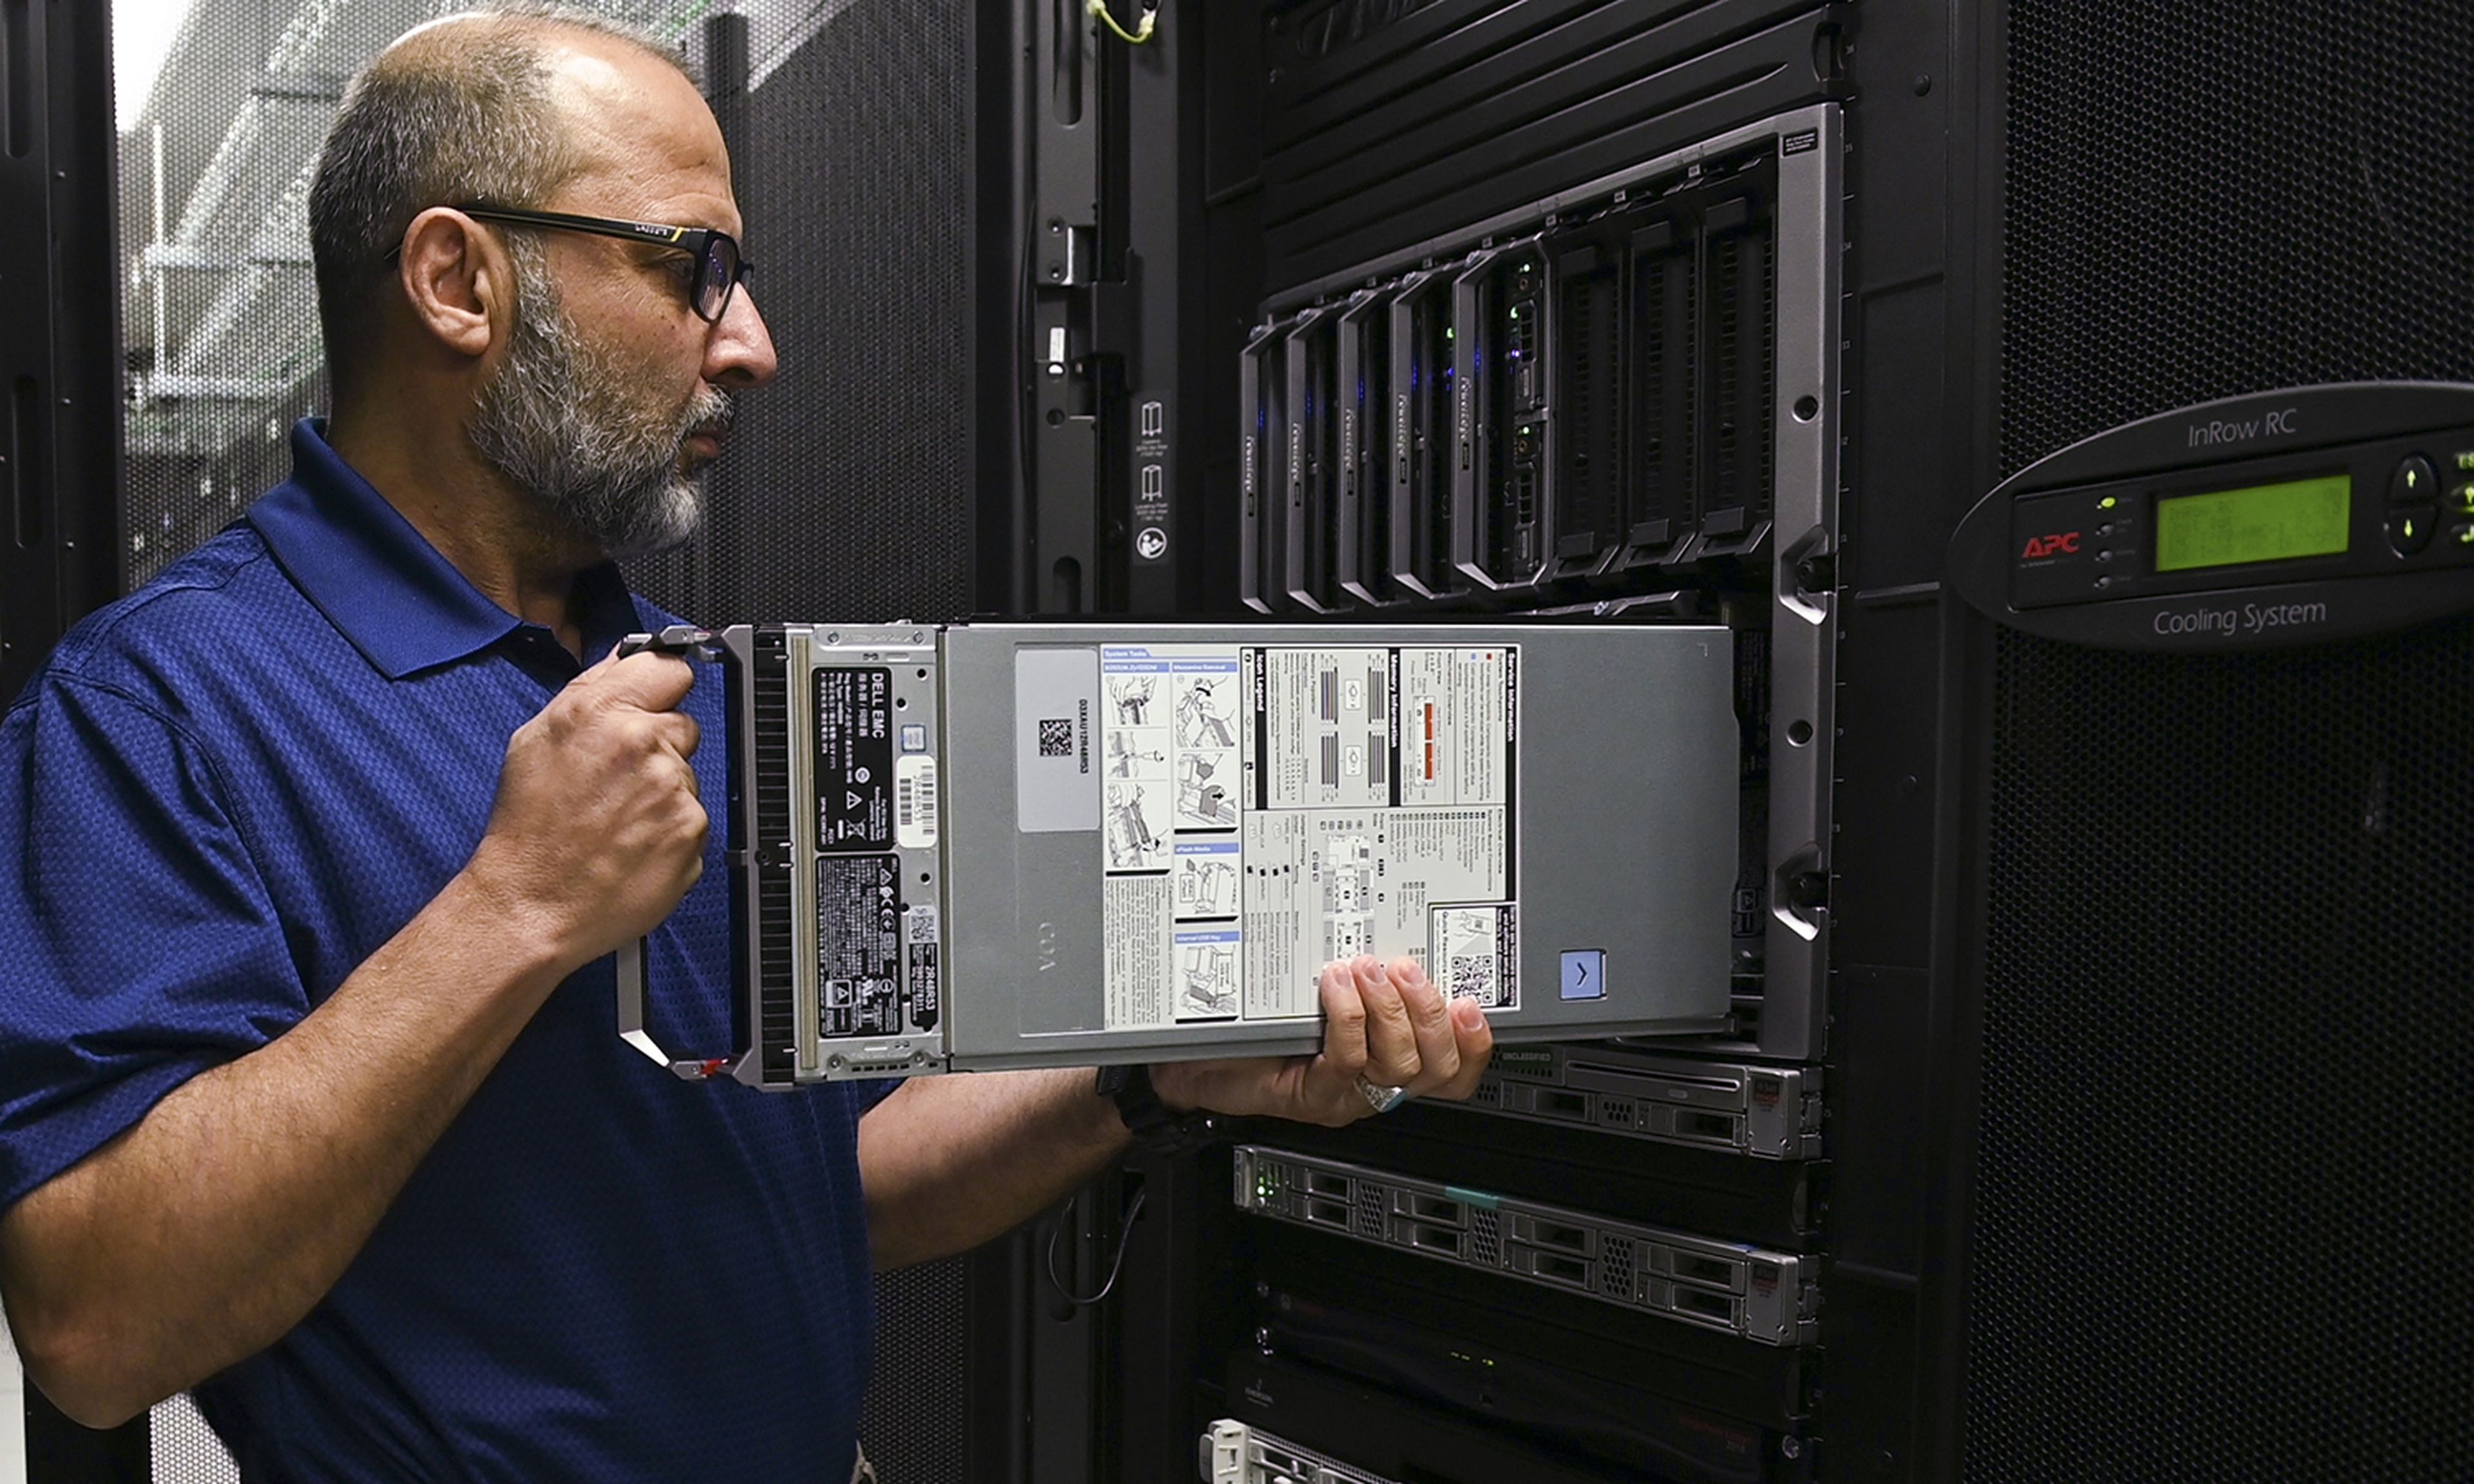 Experts examine high-performing network servers